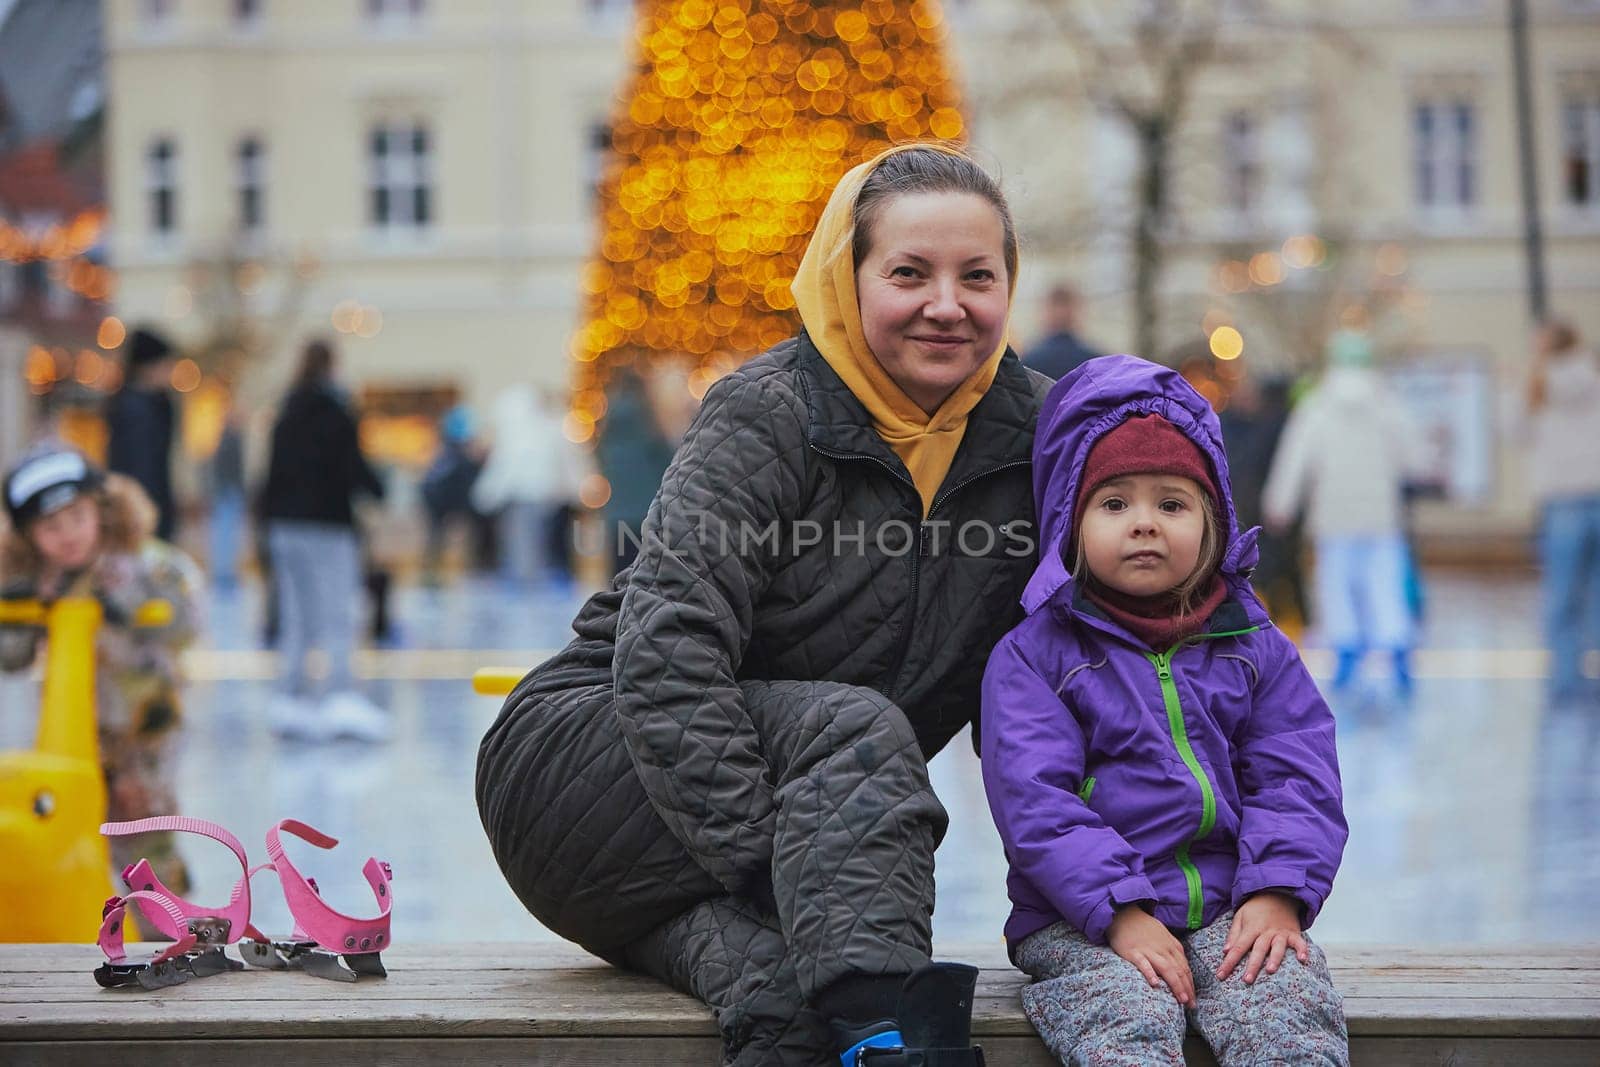 Mom with her daughter in Denmark for Christmas.